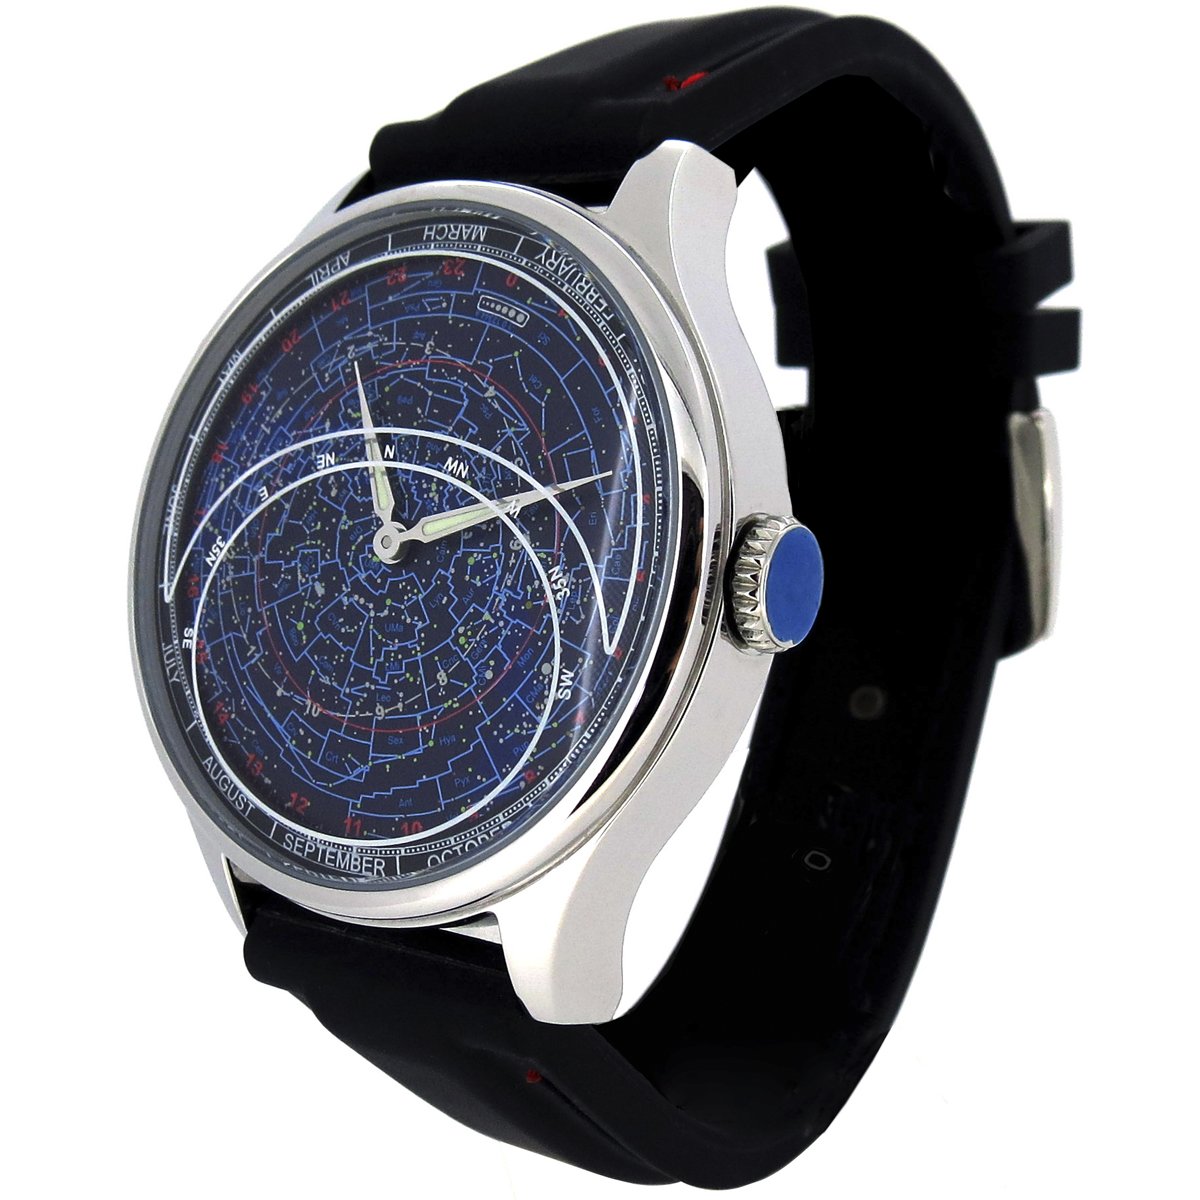 Astro II Constellation Watch - Planisphere and Astronomy Celestial Timepiece